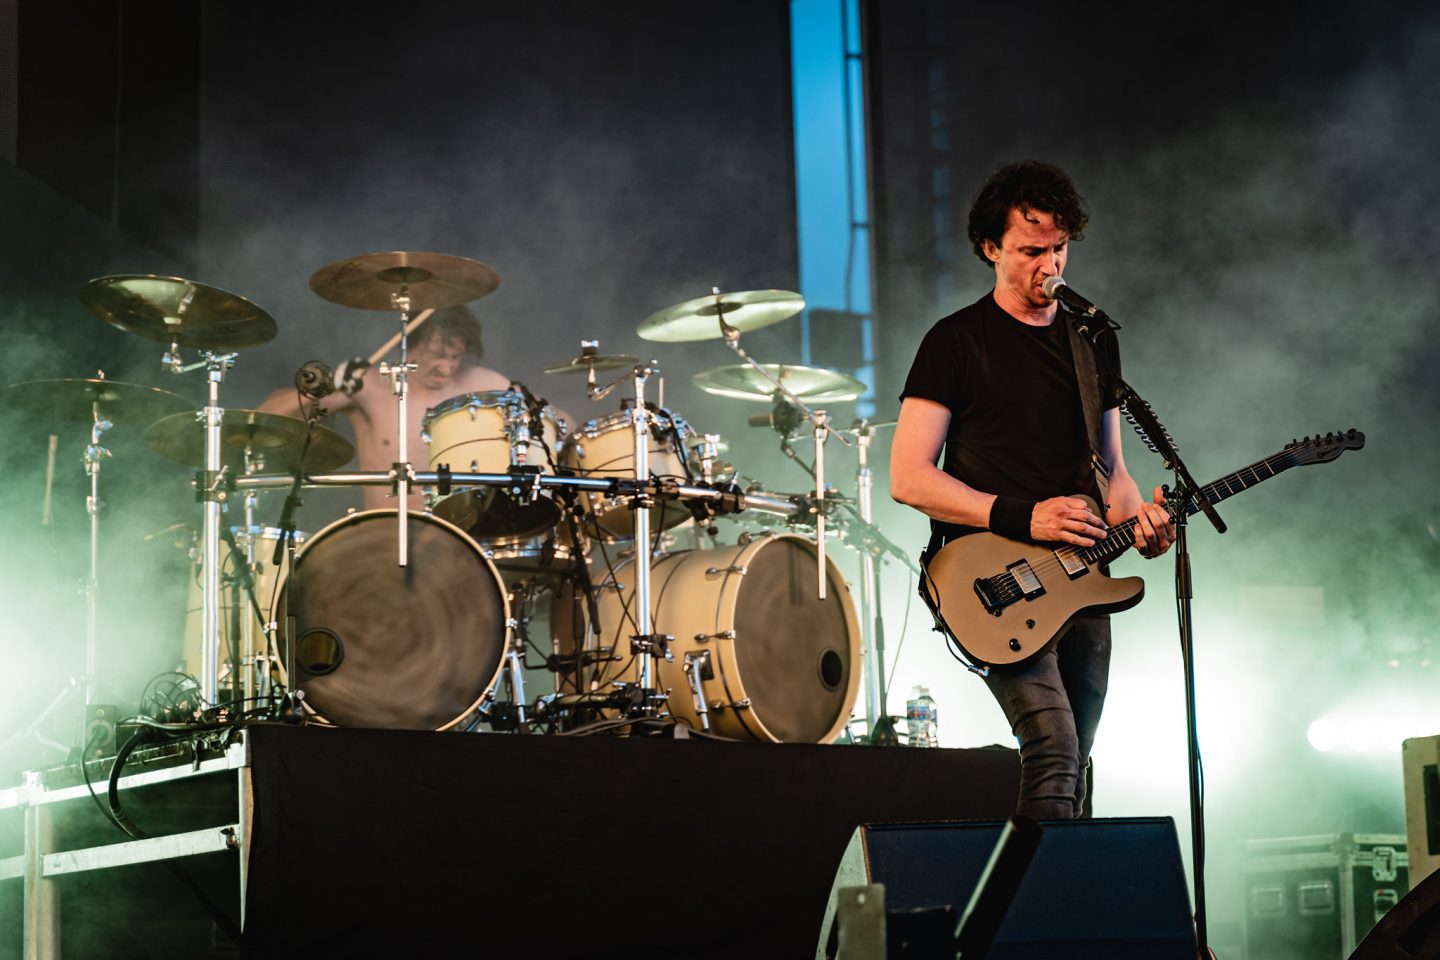 Gojira at Chicago Open Air 2019 by Thomas Bock Photography